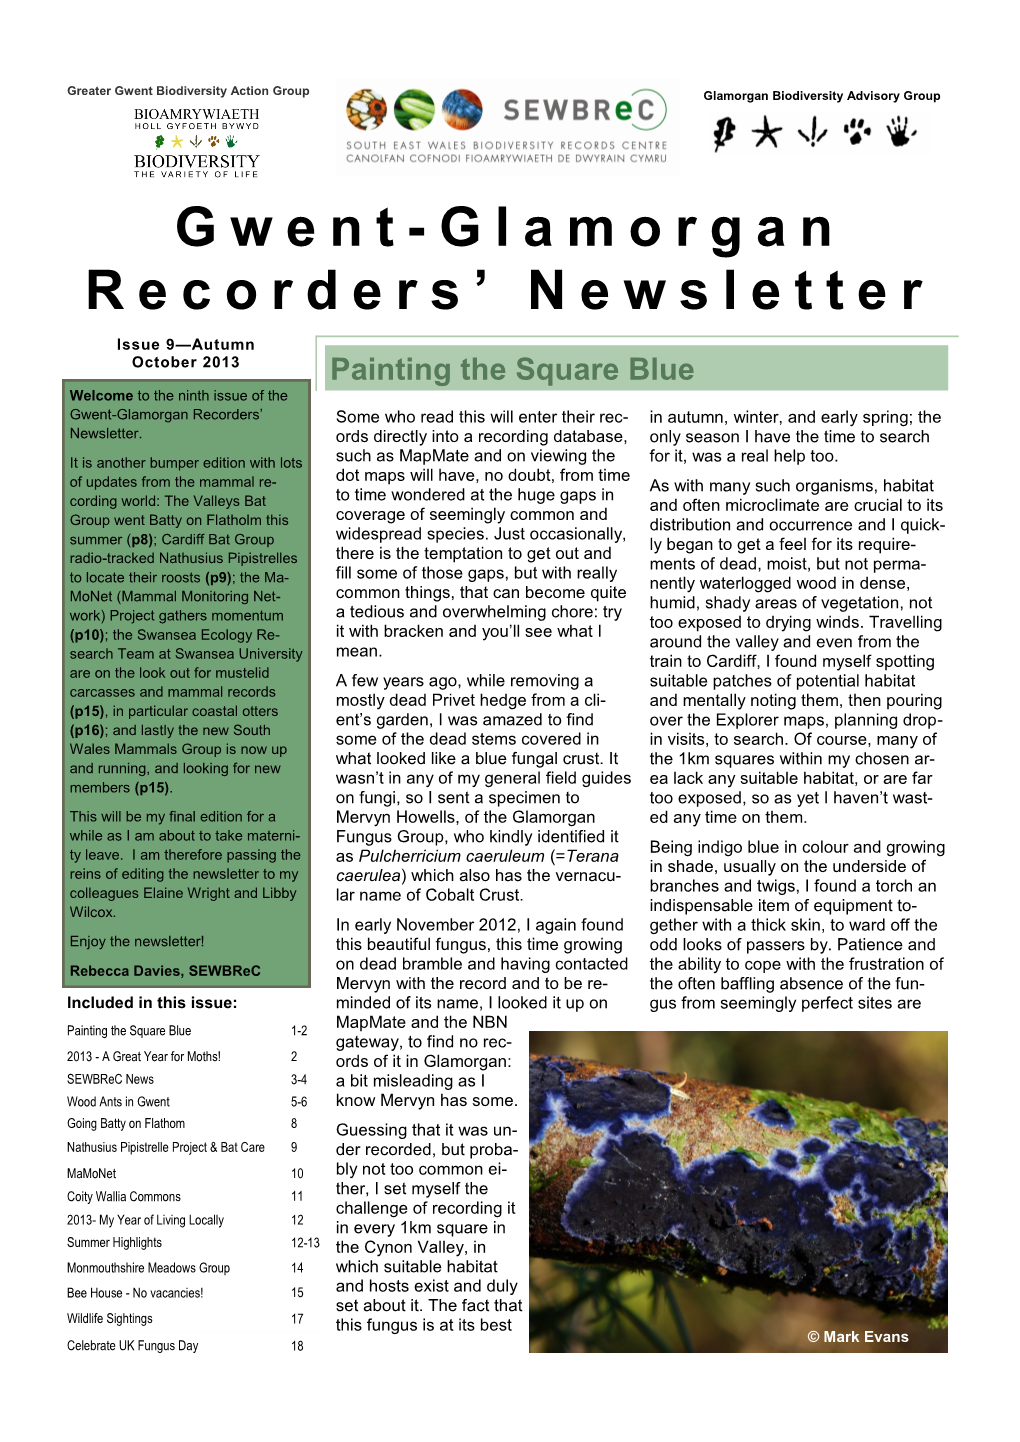 Gwent-Glamorgan Recorders' Newsletter Issue 9